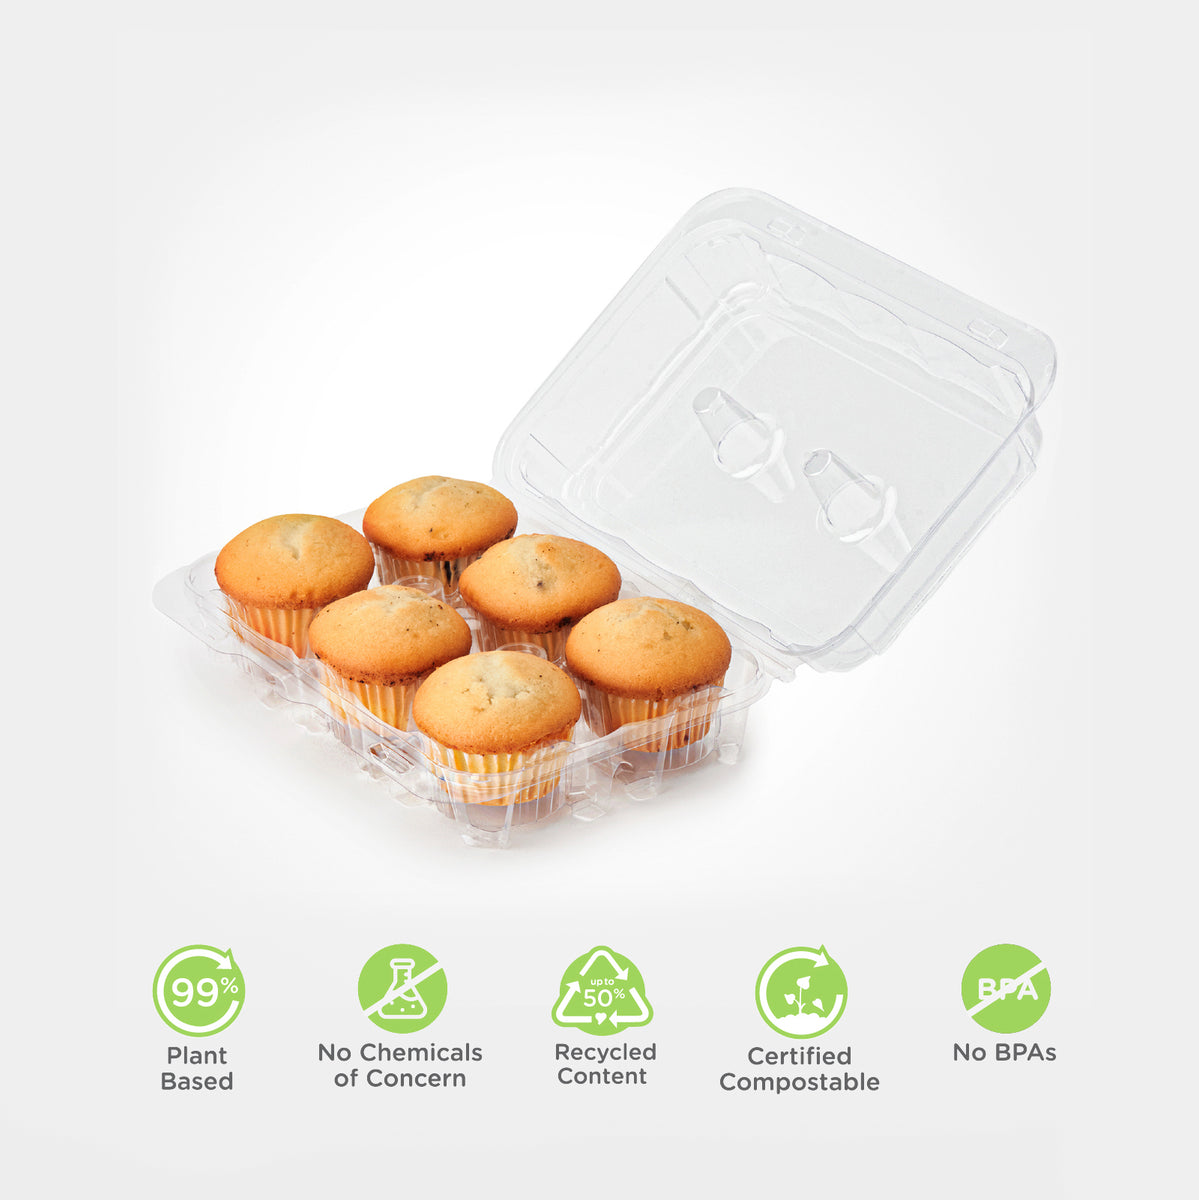 6 Cupcake & Muffin Container | Bioplastic Box for 6 Count 2.75 Cupcakes Items / Case: 300 / Crystal Clear Made by Good Natured Products Inc.